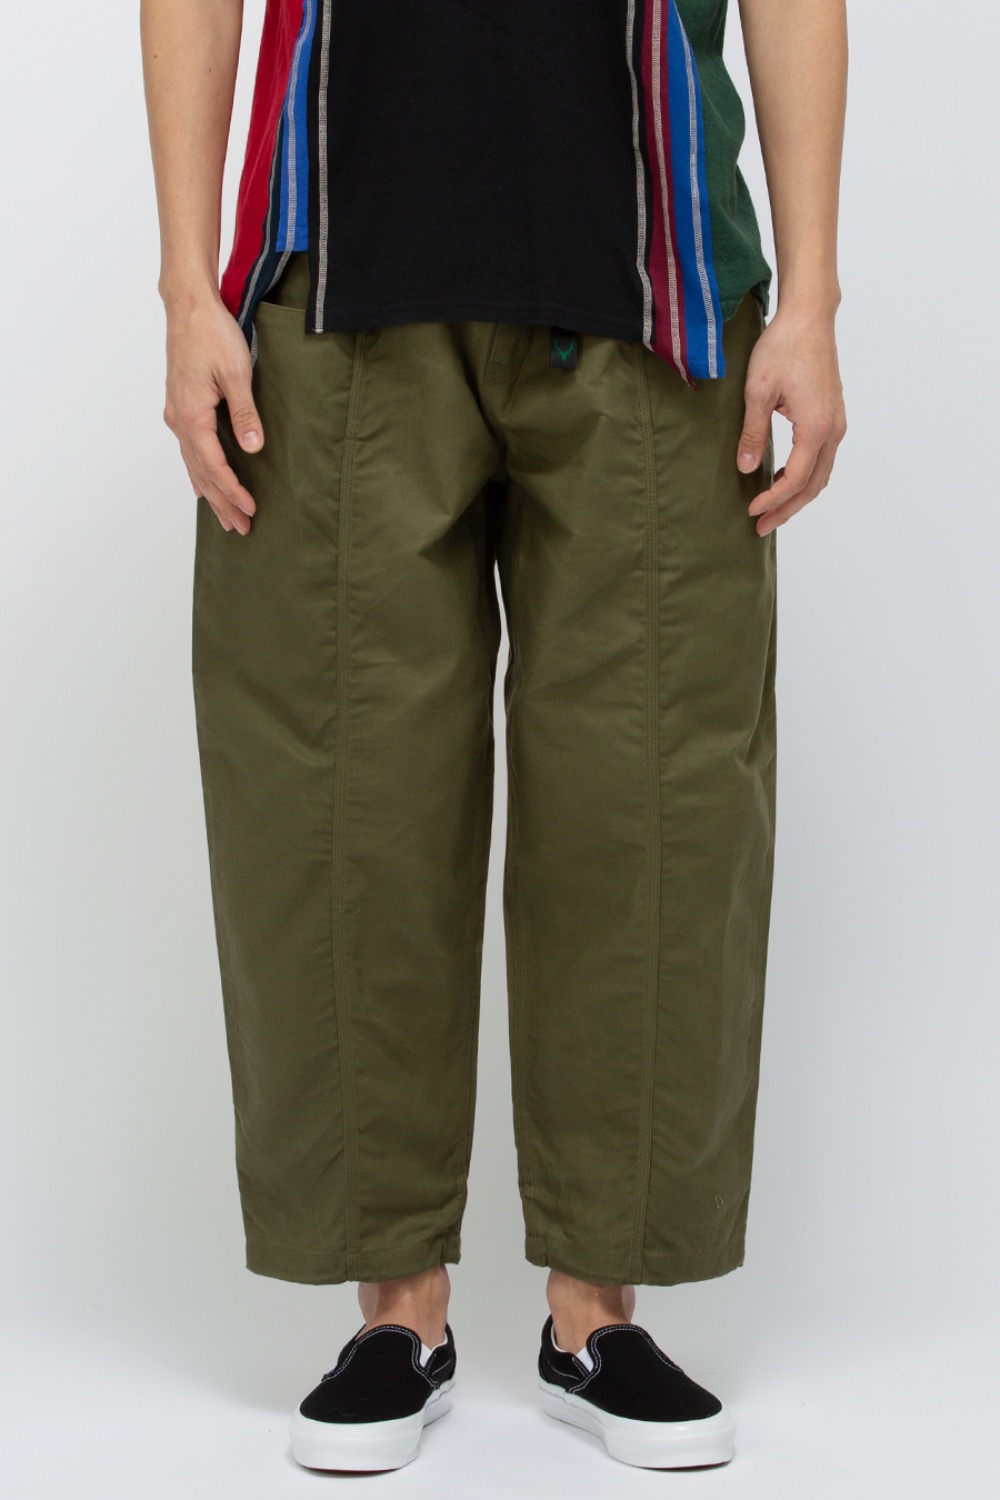 SOUTH2 WEST8 ウールパンツ BELTED C.S. PANT | eclipseseal.com